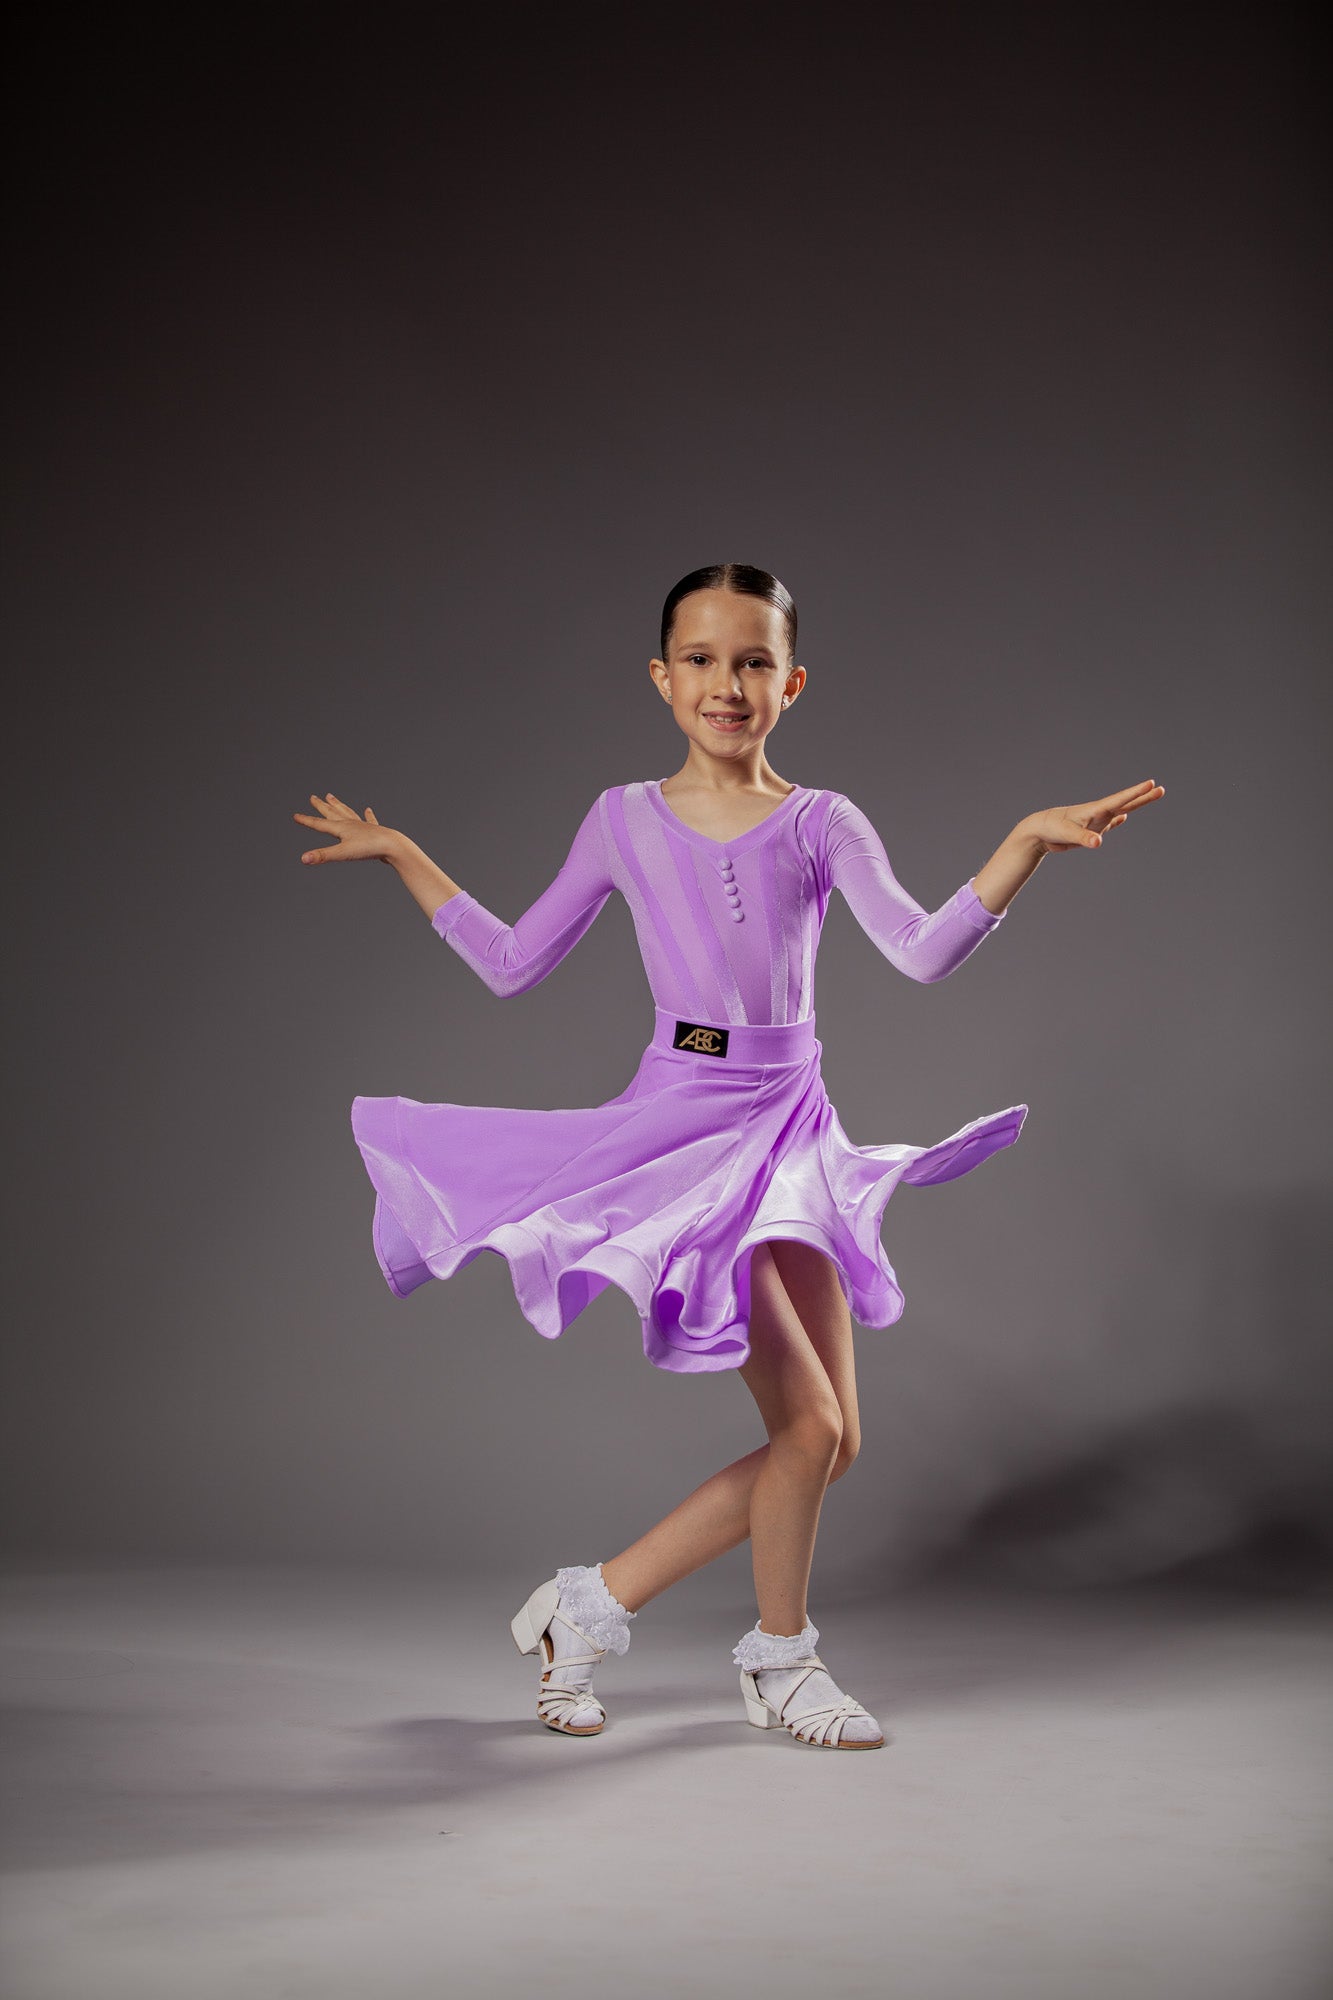 Juvenile dress Adelina in lilac color